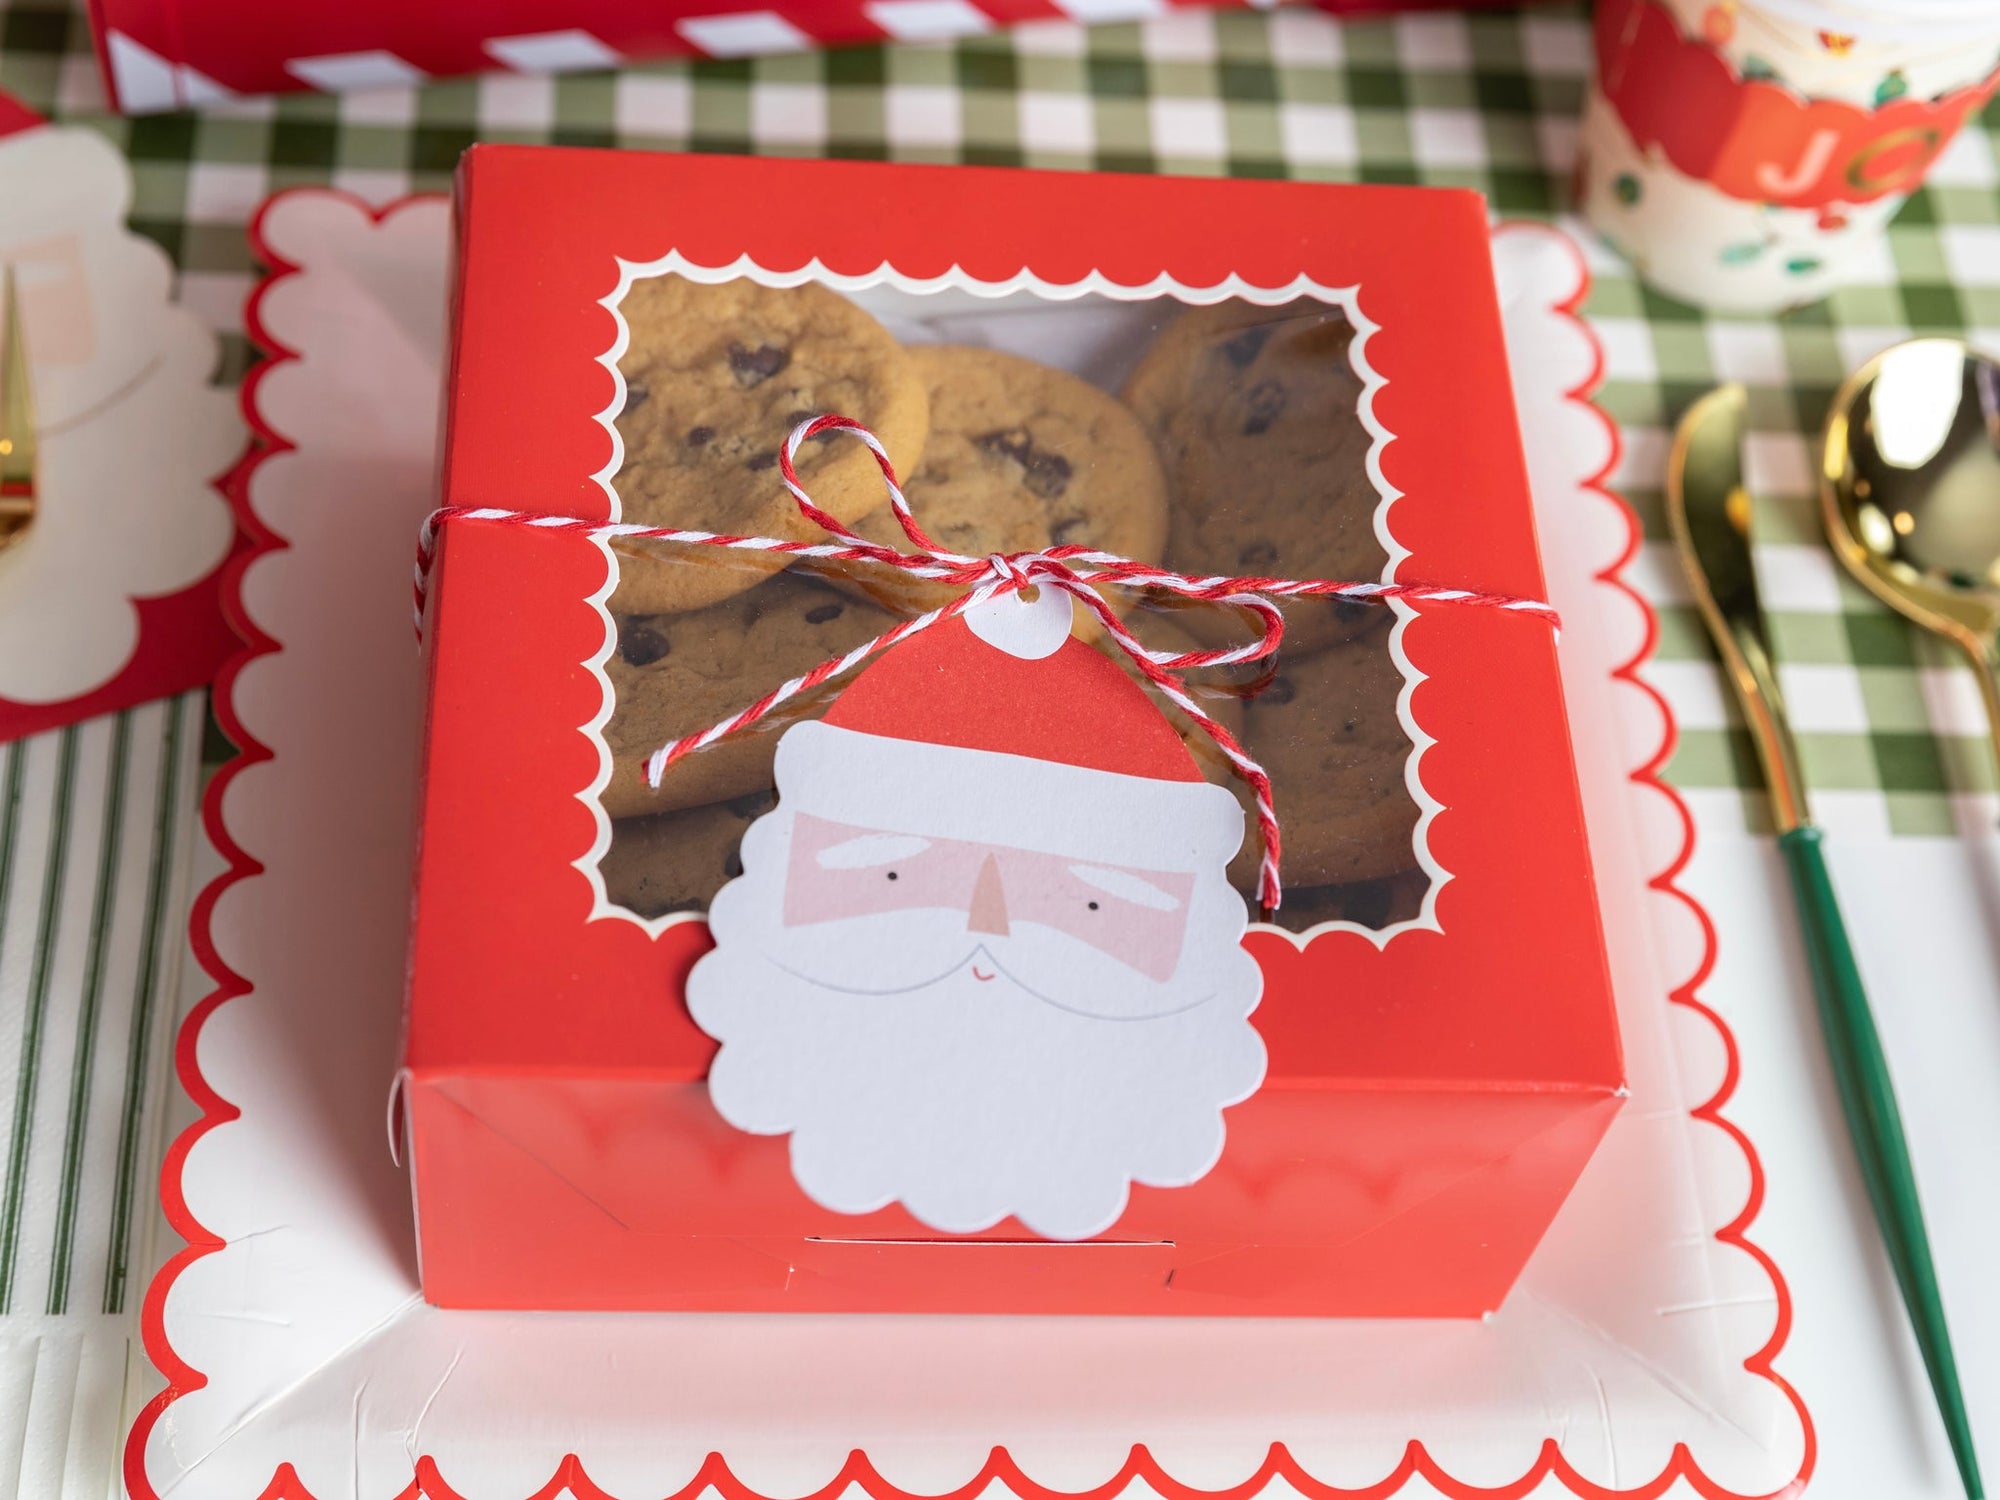 Christmas Baking Cups, Treat Cups & Cookies Boxes